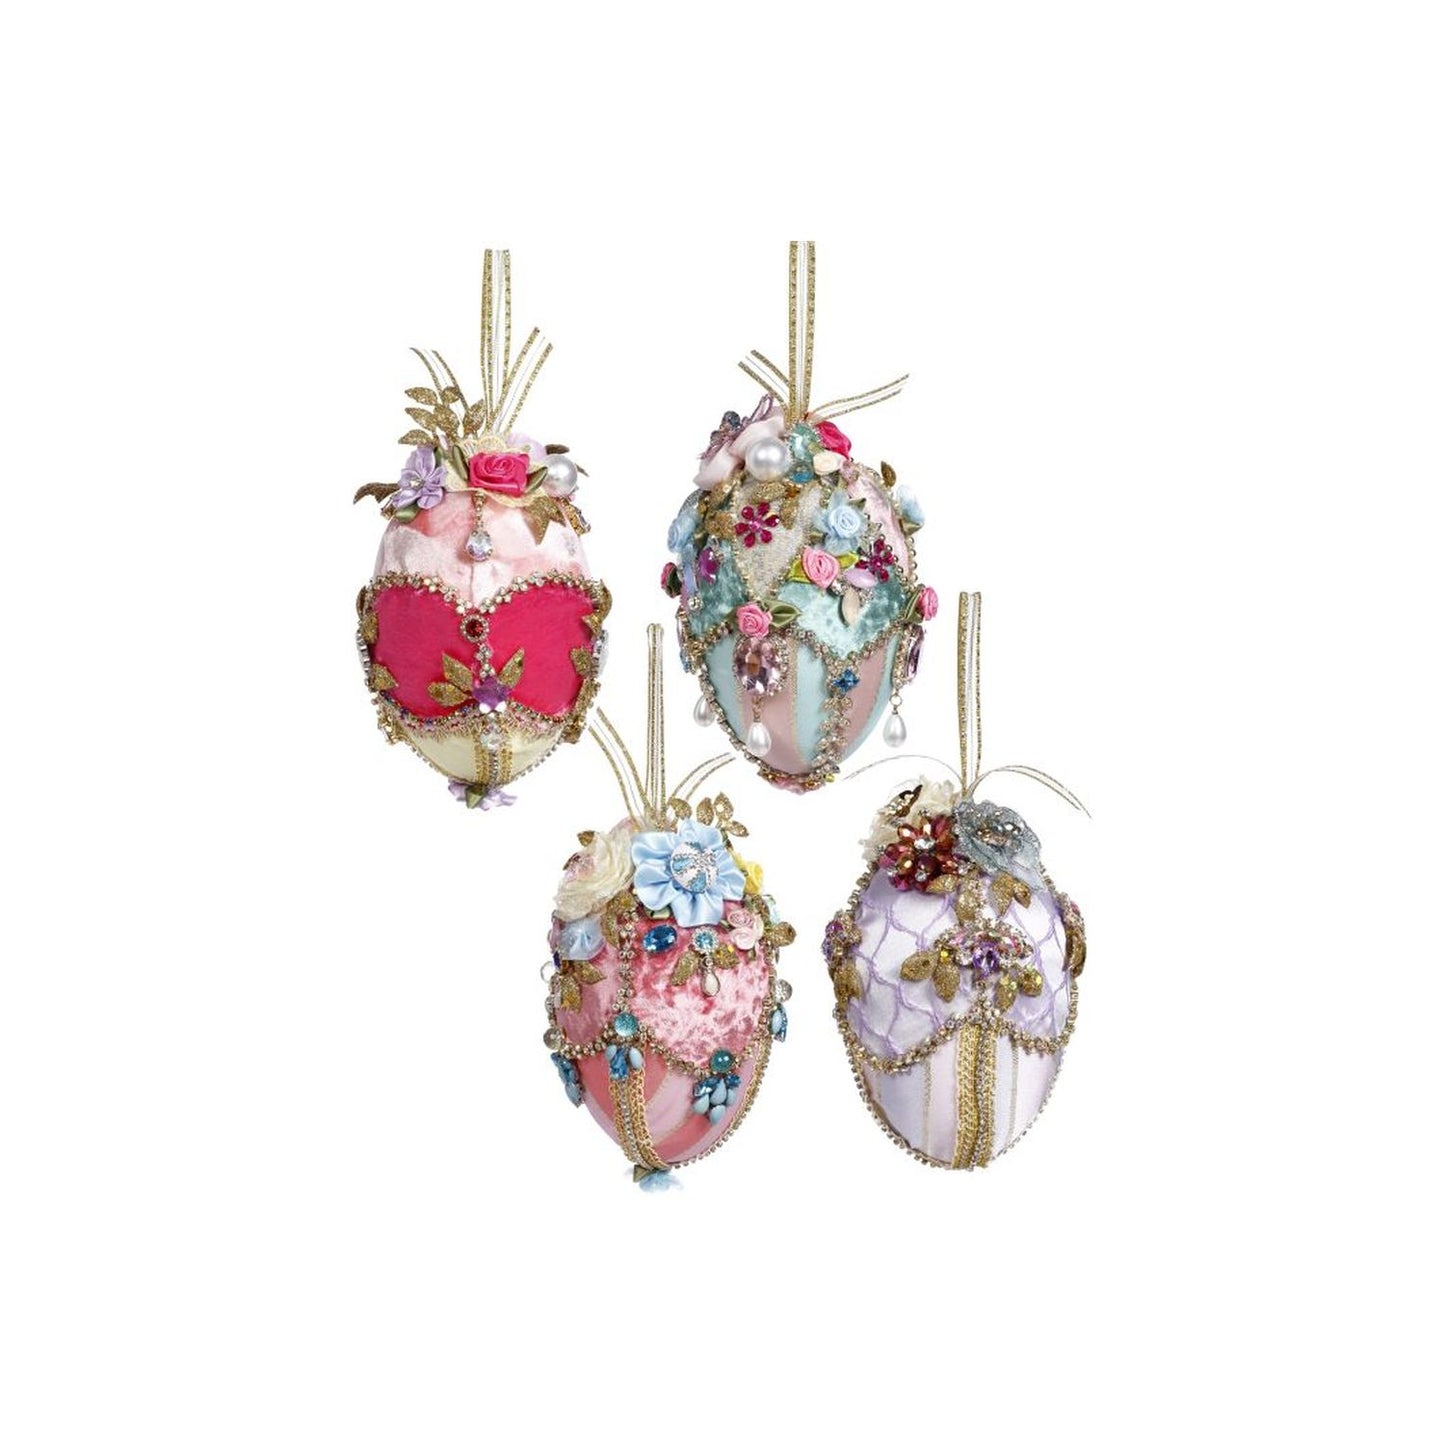 Mark Roberts Spring 2024 Fabric Jeweled Easter Eggs, Assortment of 4 - 6 Inches